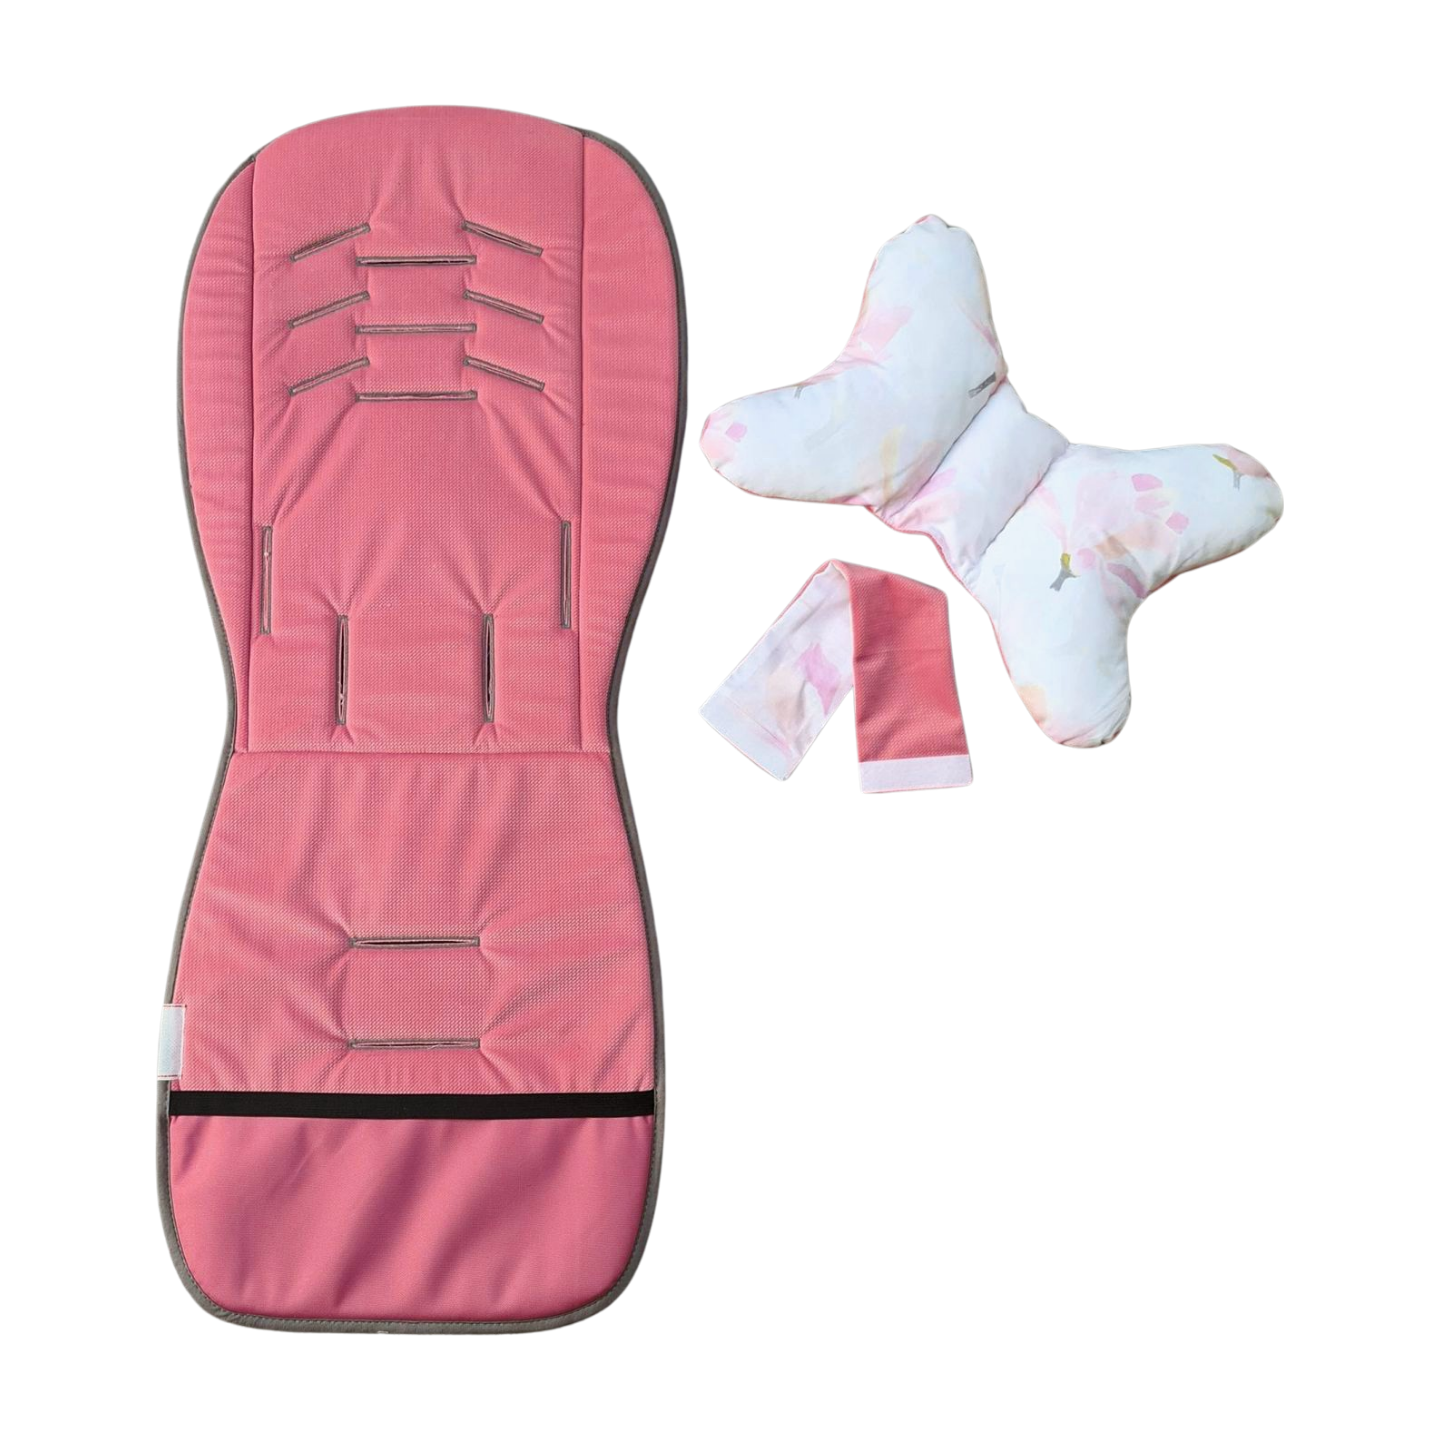 stroller liner and head support pillow for baby travel pink